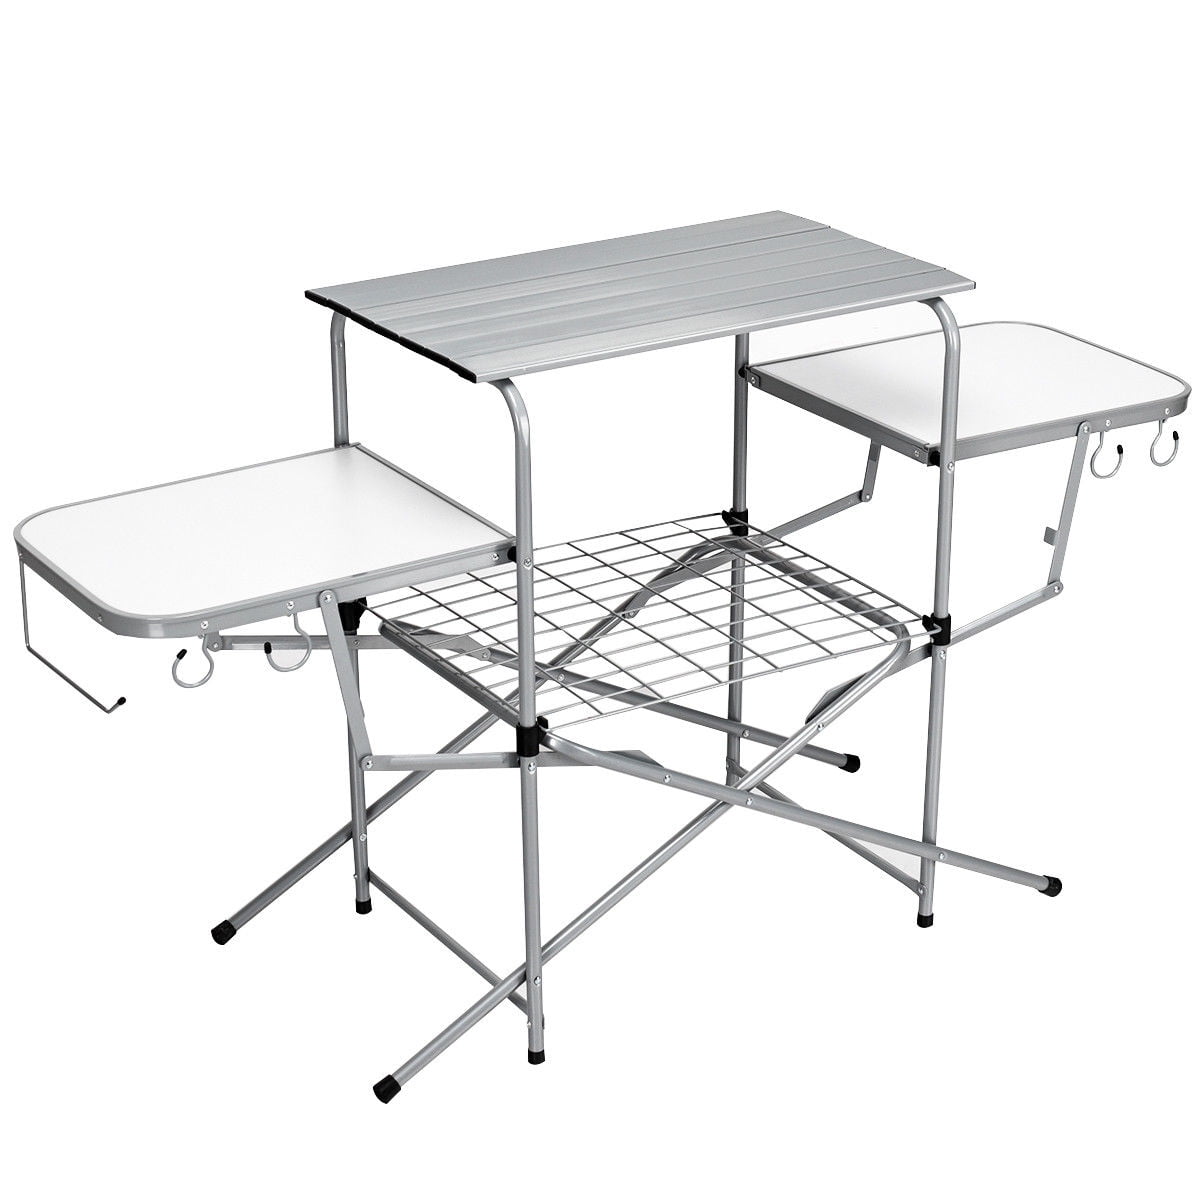 Portable Folding Camping Table Barbecue Plat Rack Metal Grill BBQ Picnic Tables 